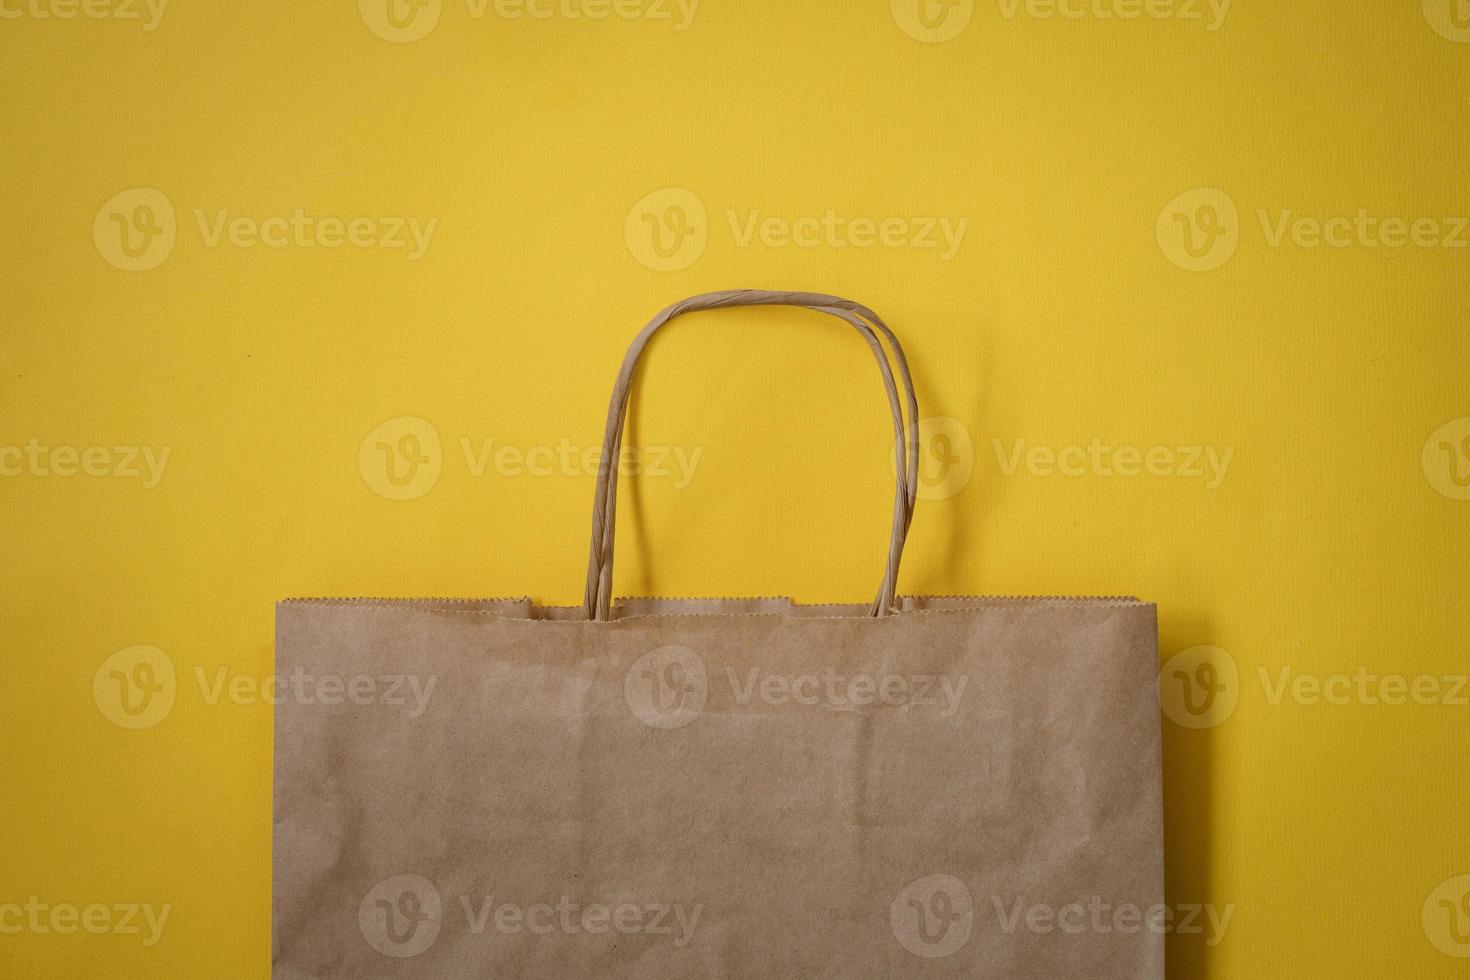 Paper bag on a yellow background photo